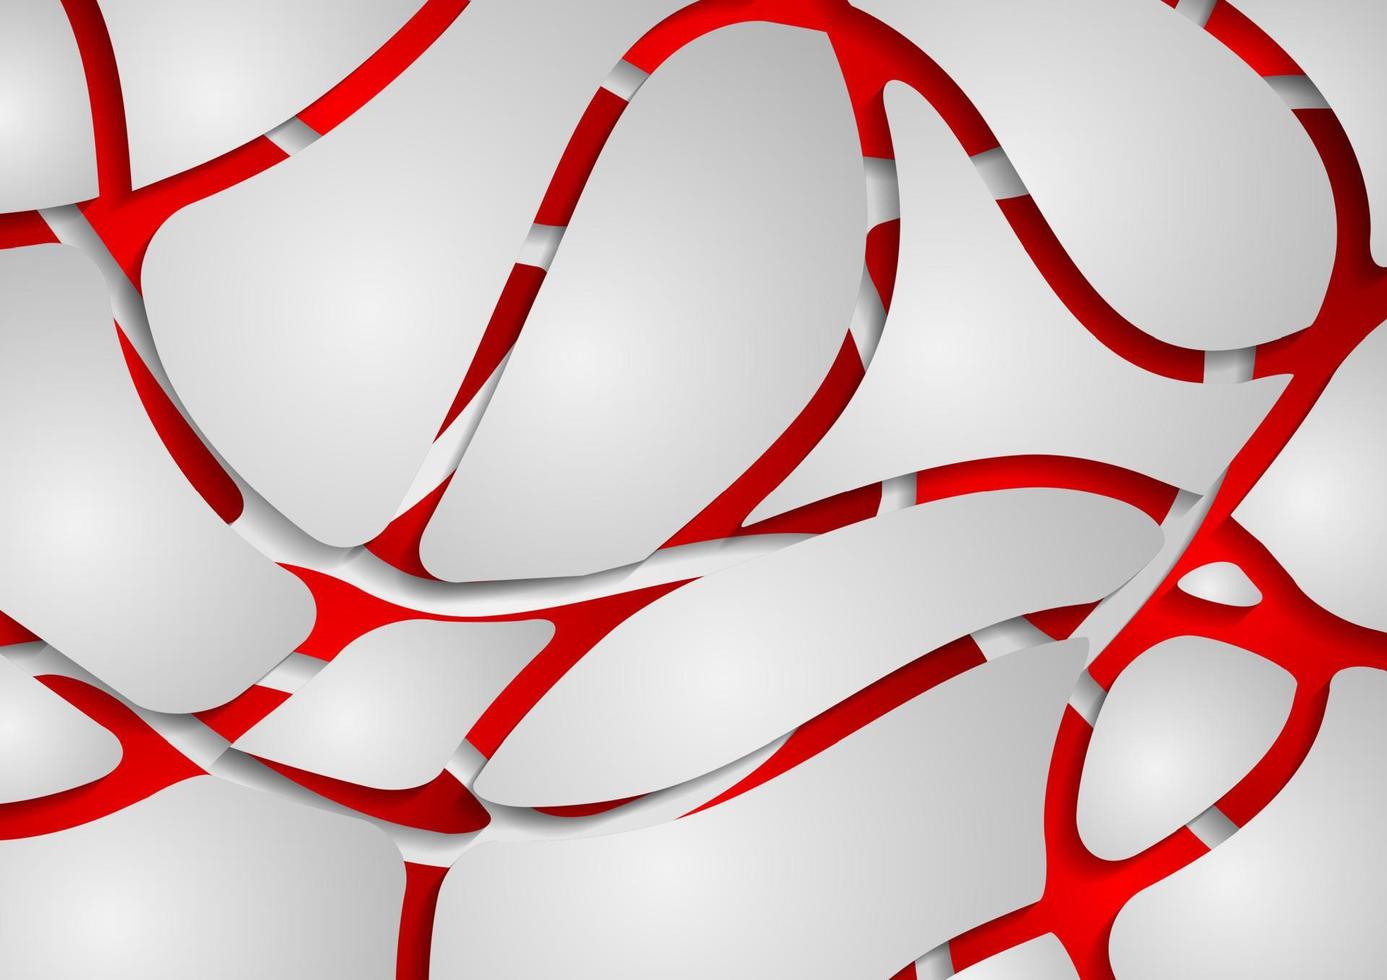 Grey and red abstract wavy pattern design vector